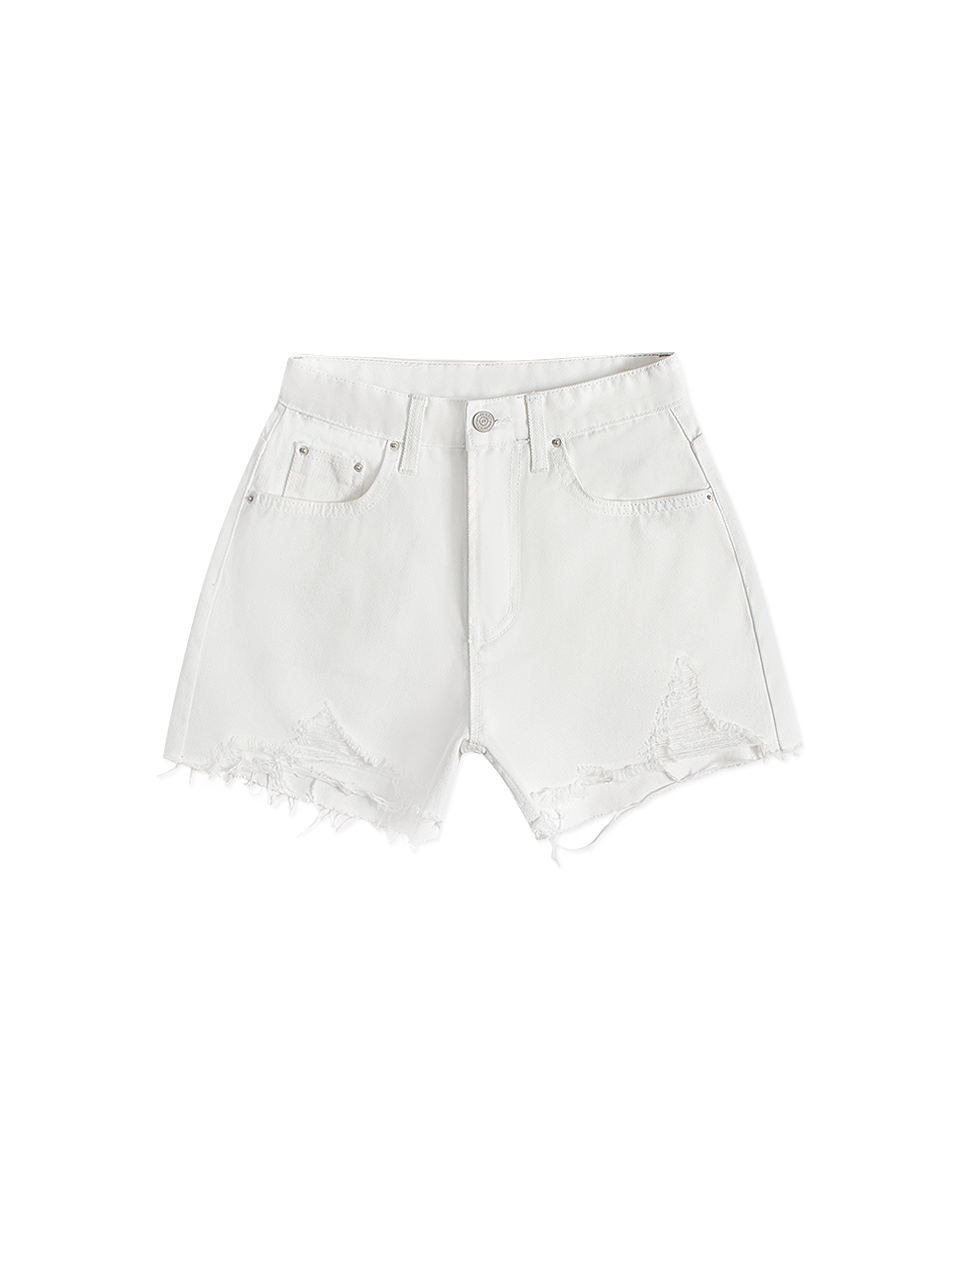 [SHORTS] Move Jeans